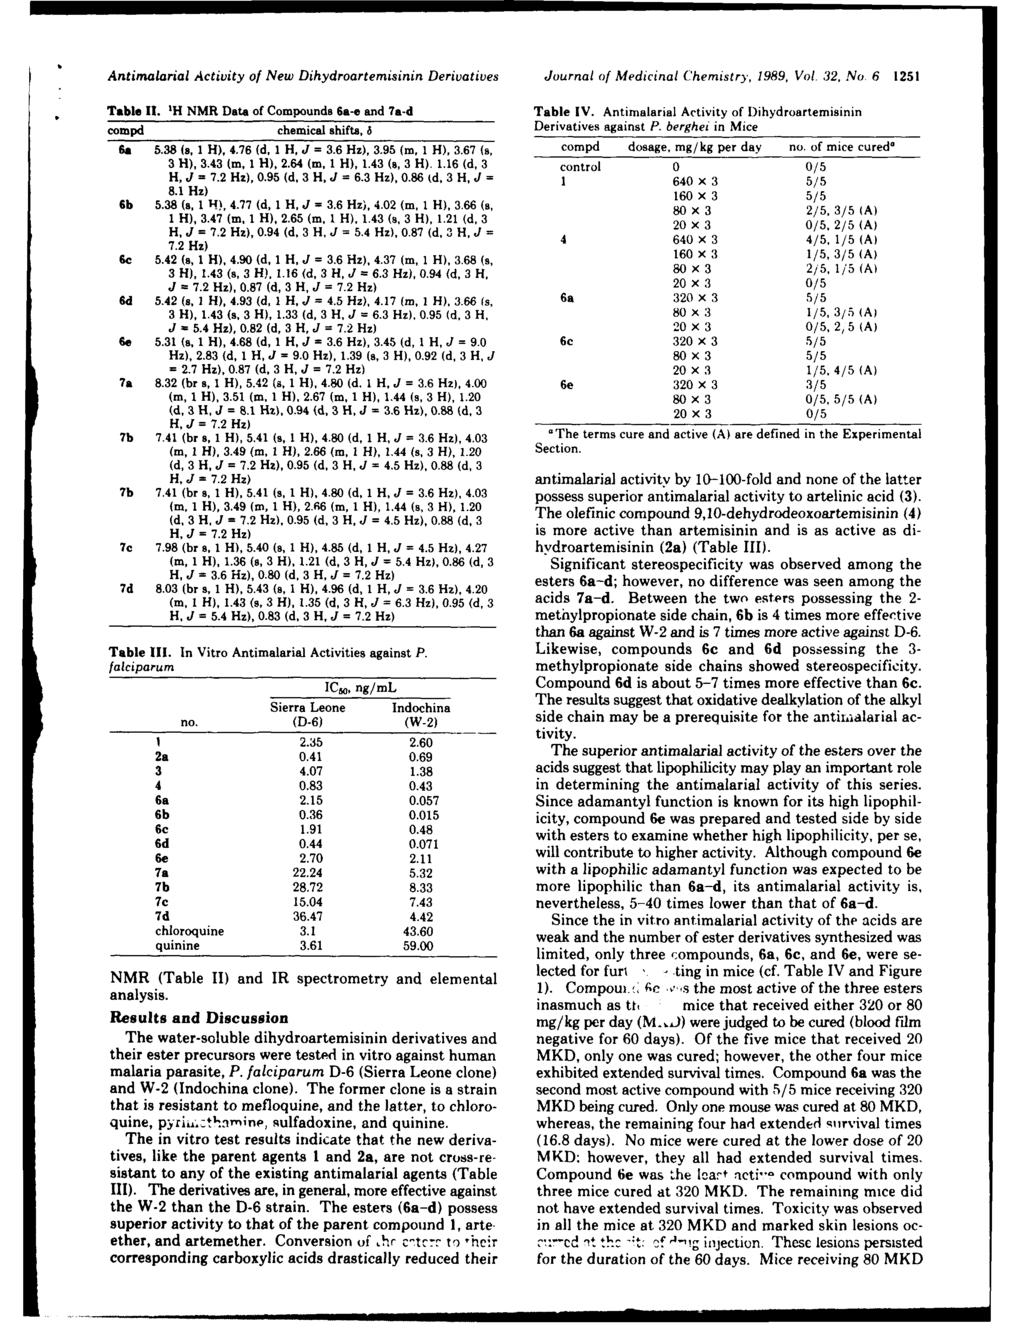 Antimalarial Activity of New Dihydroartemisinin Derivatives Journal of Medicinal Chemistry, 1989, Vol. 32, No. 6 1251 Table It. 1H NMR Data of Compounds 6a-e and 7a-d Table IV.